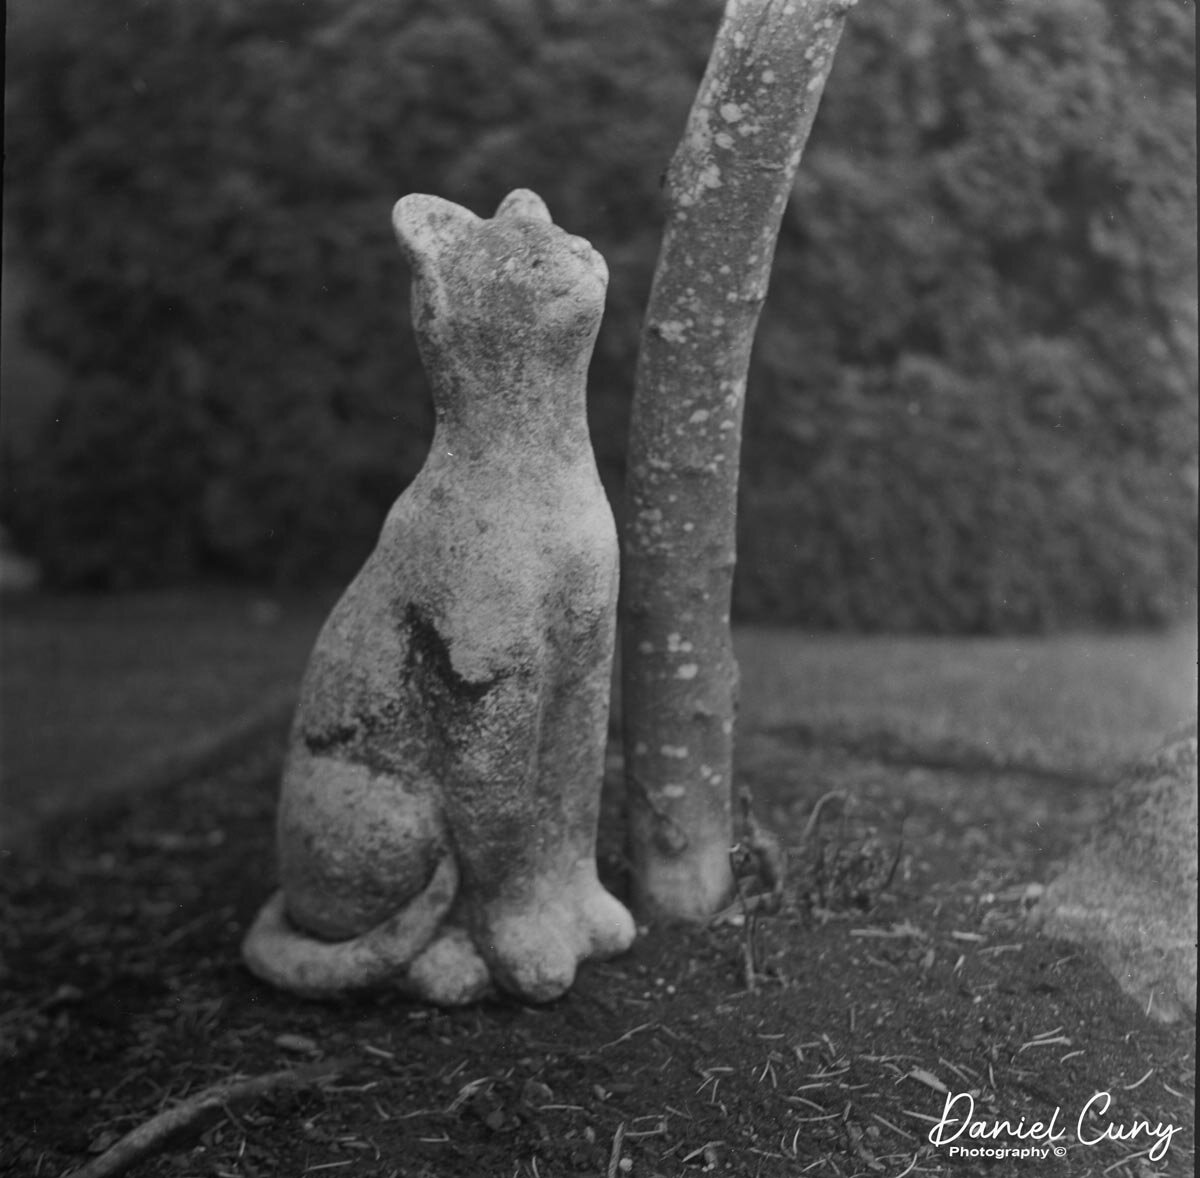 Cat statue in front yard